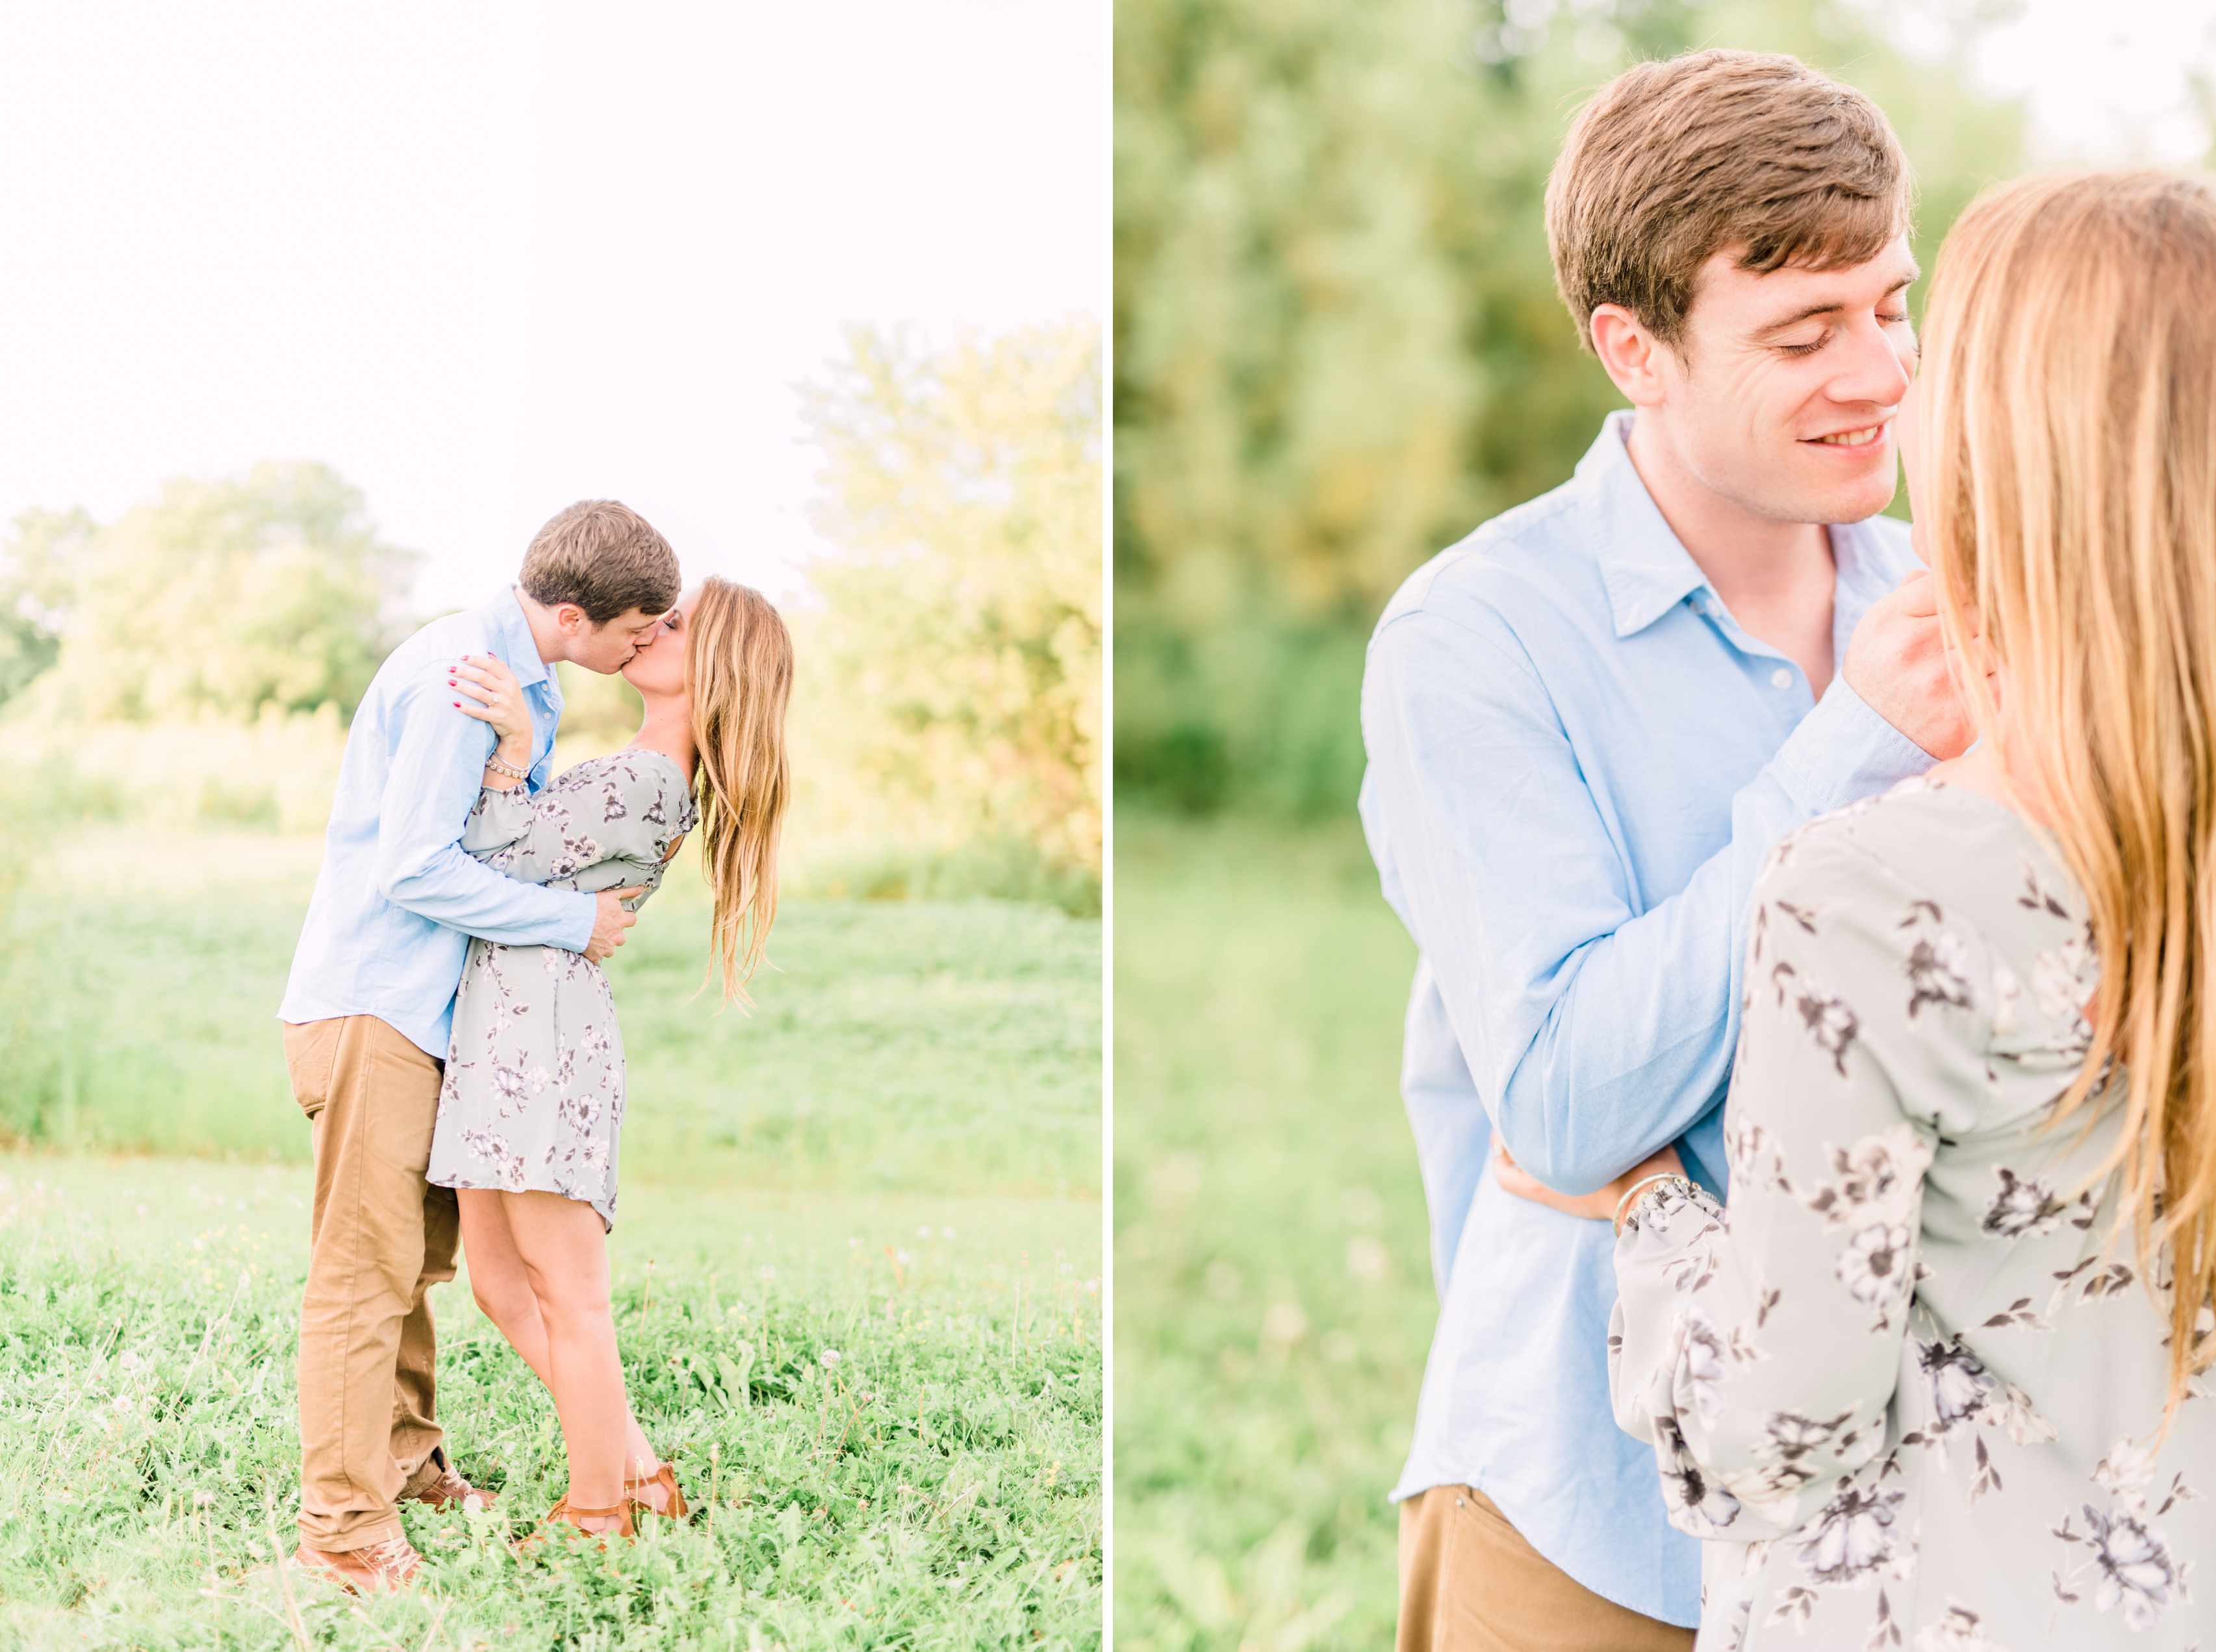 Wild Garden Engagement Session {Emma & Conor} - Bailey Elle Photography